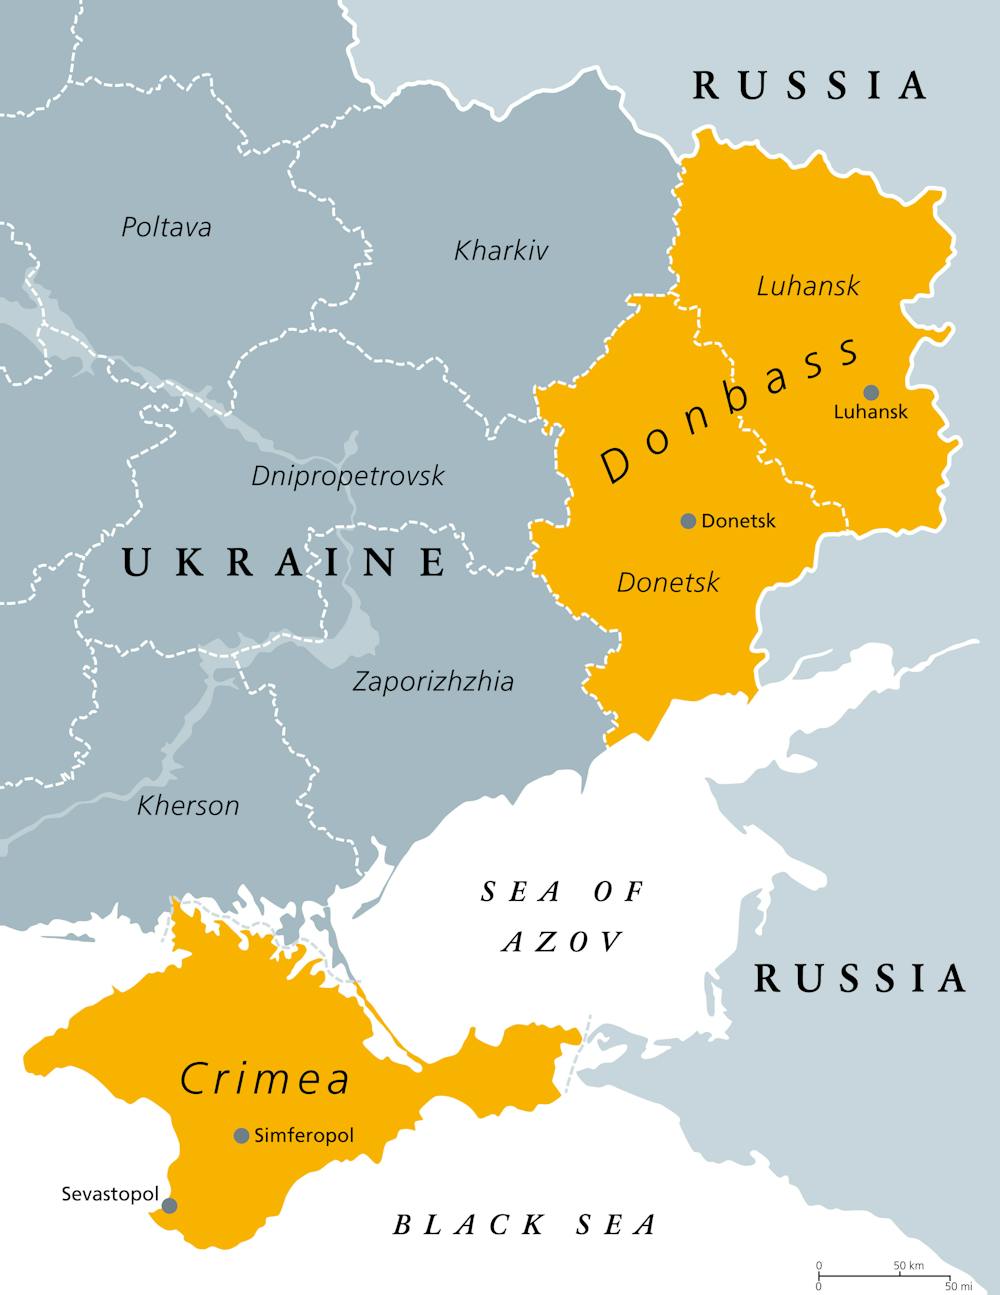 Ukraine Crisis Between Russia And The West In The Region Has Been Brewing For 30 Years